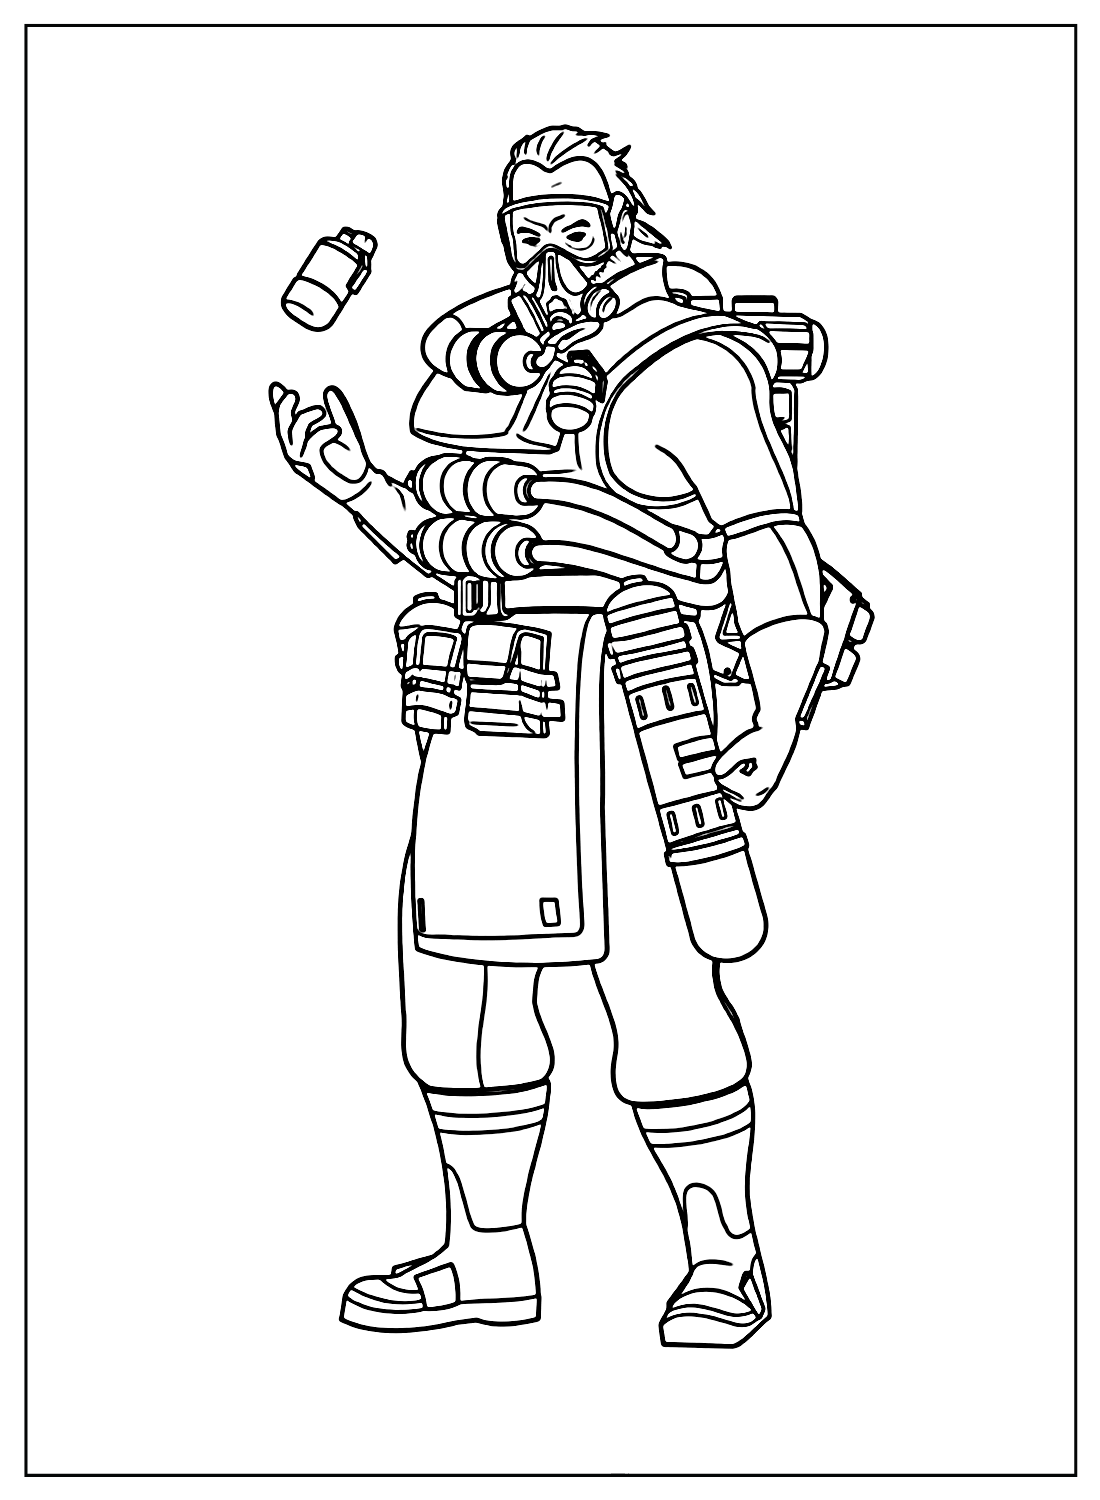 Coloring Sheets Apex Legends Caustic from Apex Legends